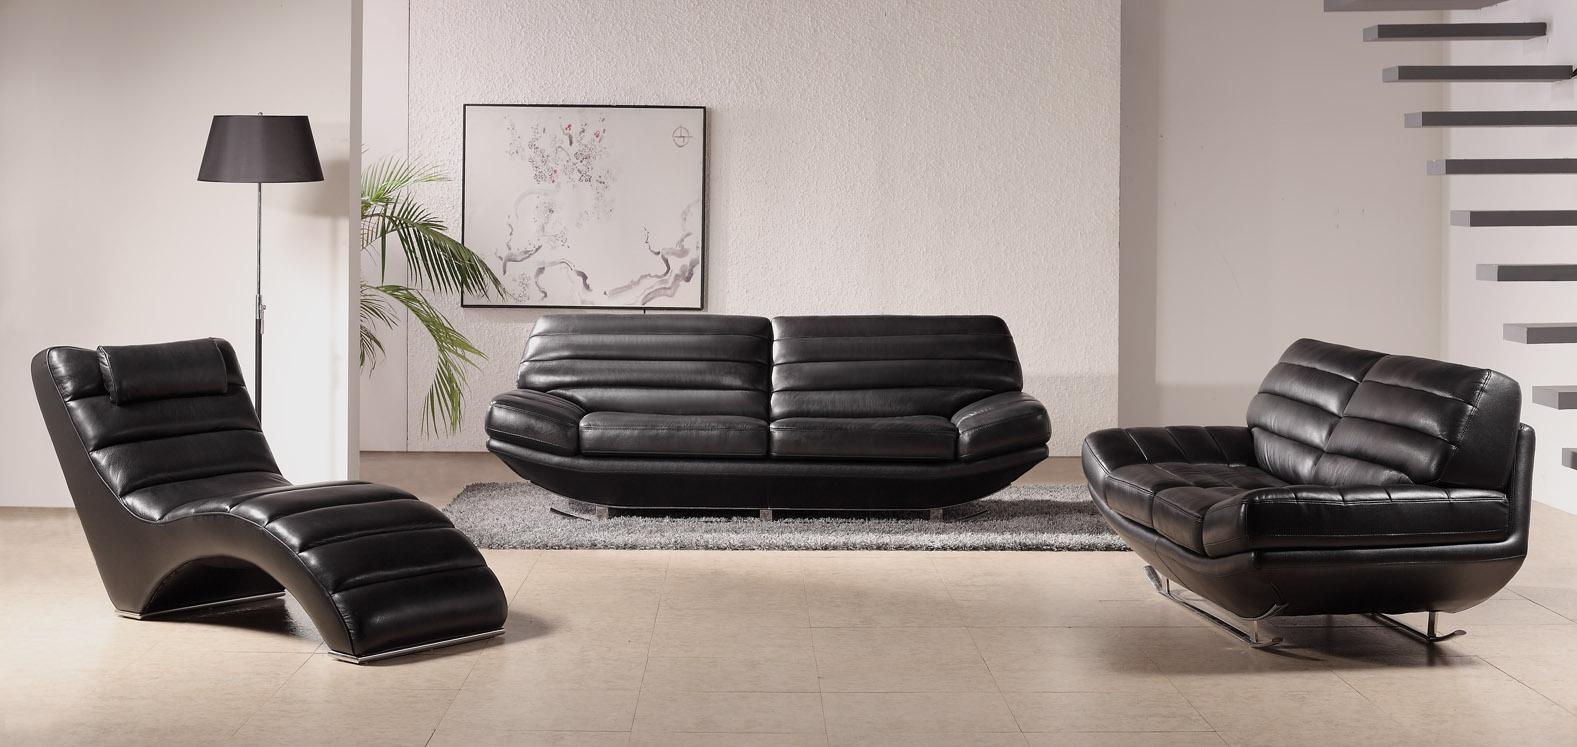 Modern Living With Wonderful Modern Living Room Design With Black Colored Contemporary Sofas Made From Leather And Cream Colored Floor Which Is Made From Marble Blocks Office & Workspace Remarkable Beautiful Contemporary Sofas With Various Elegant Styles